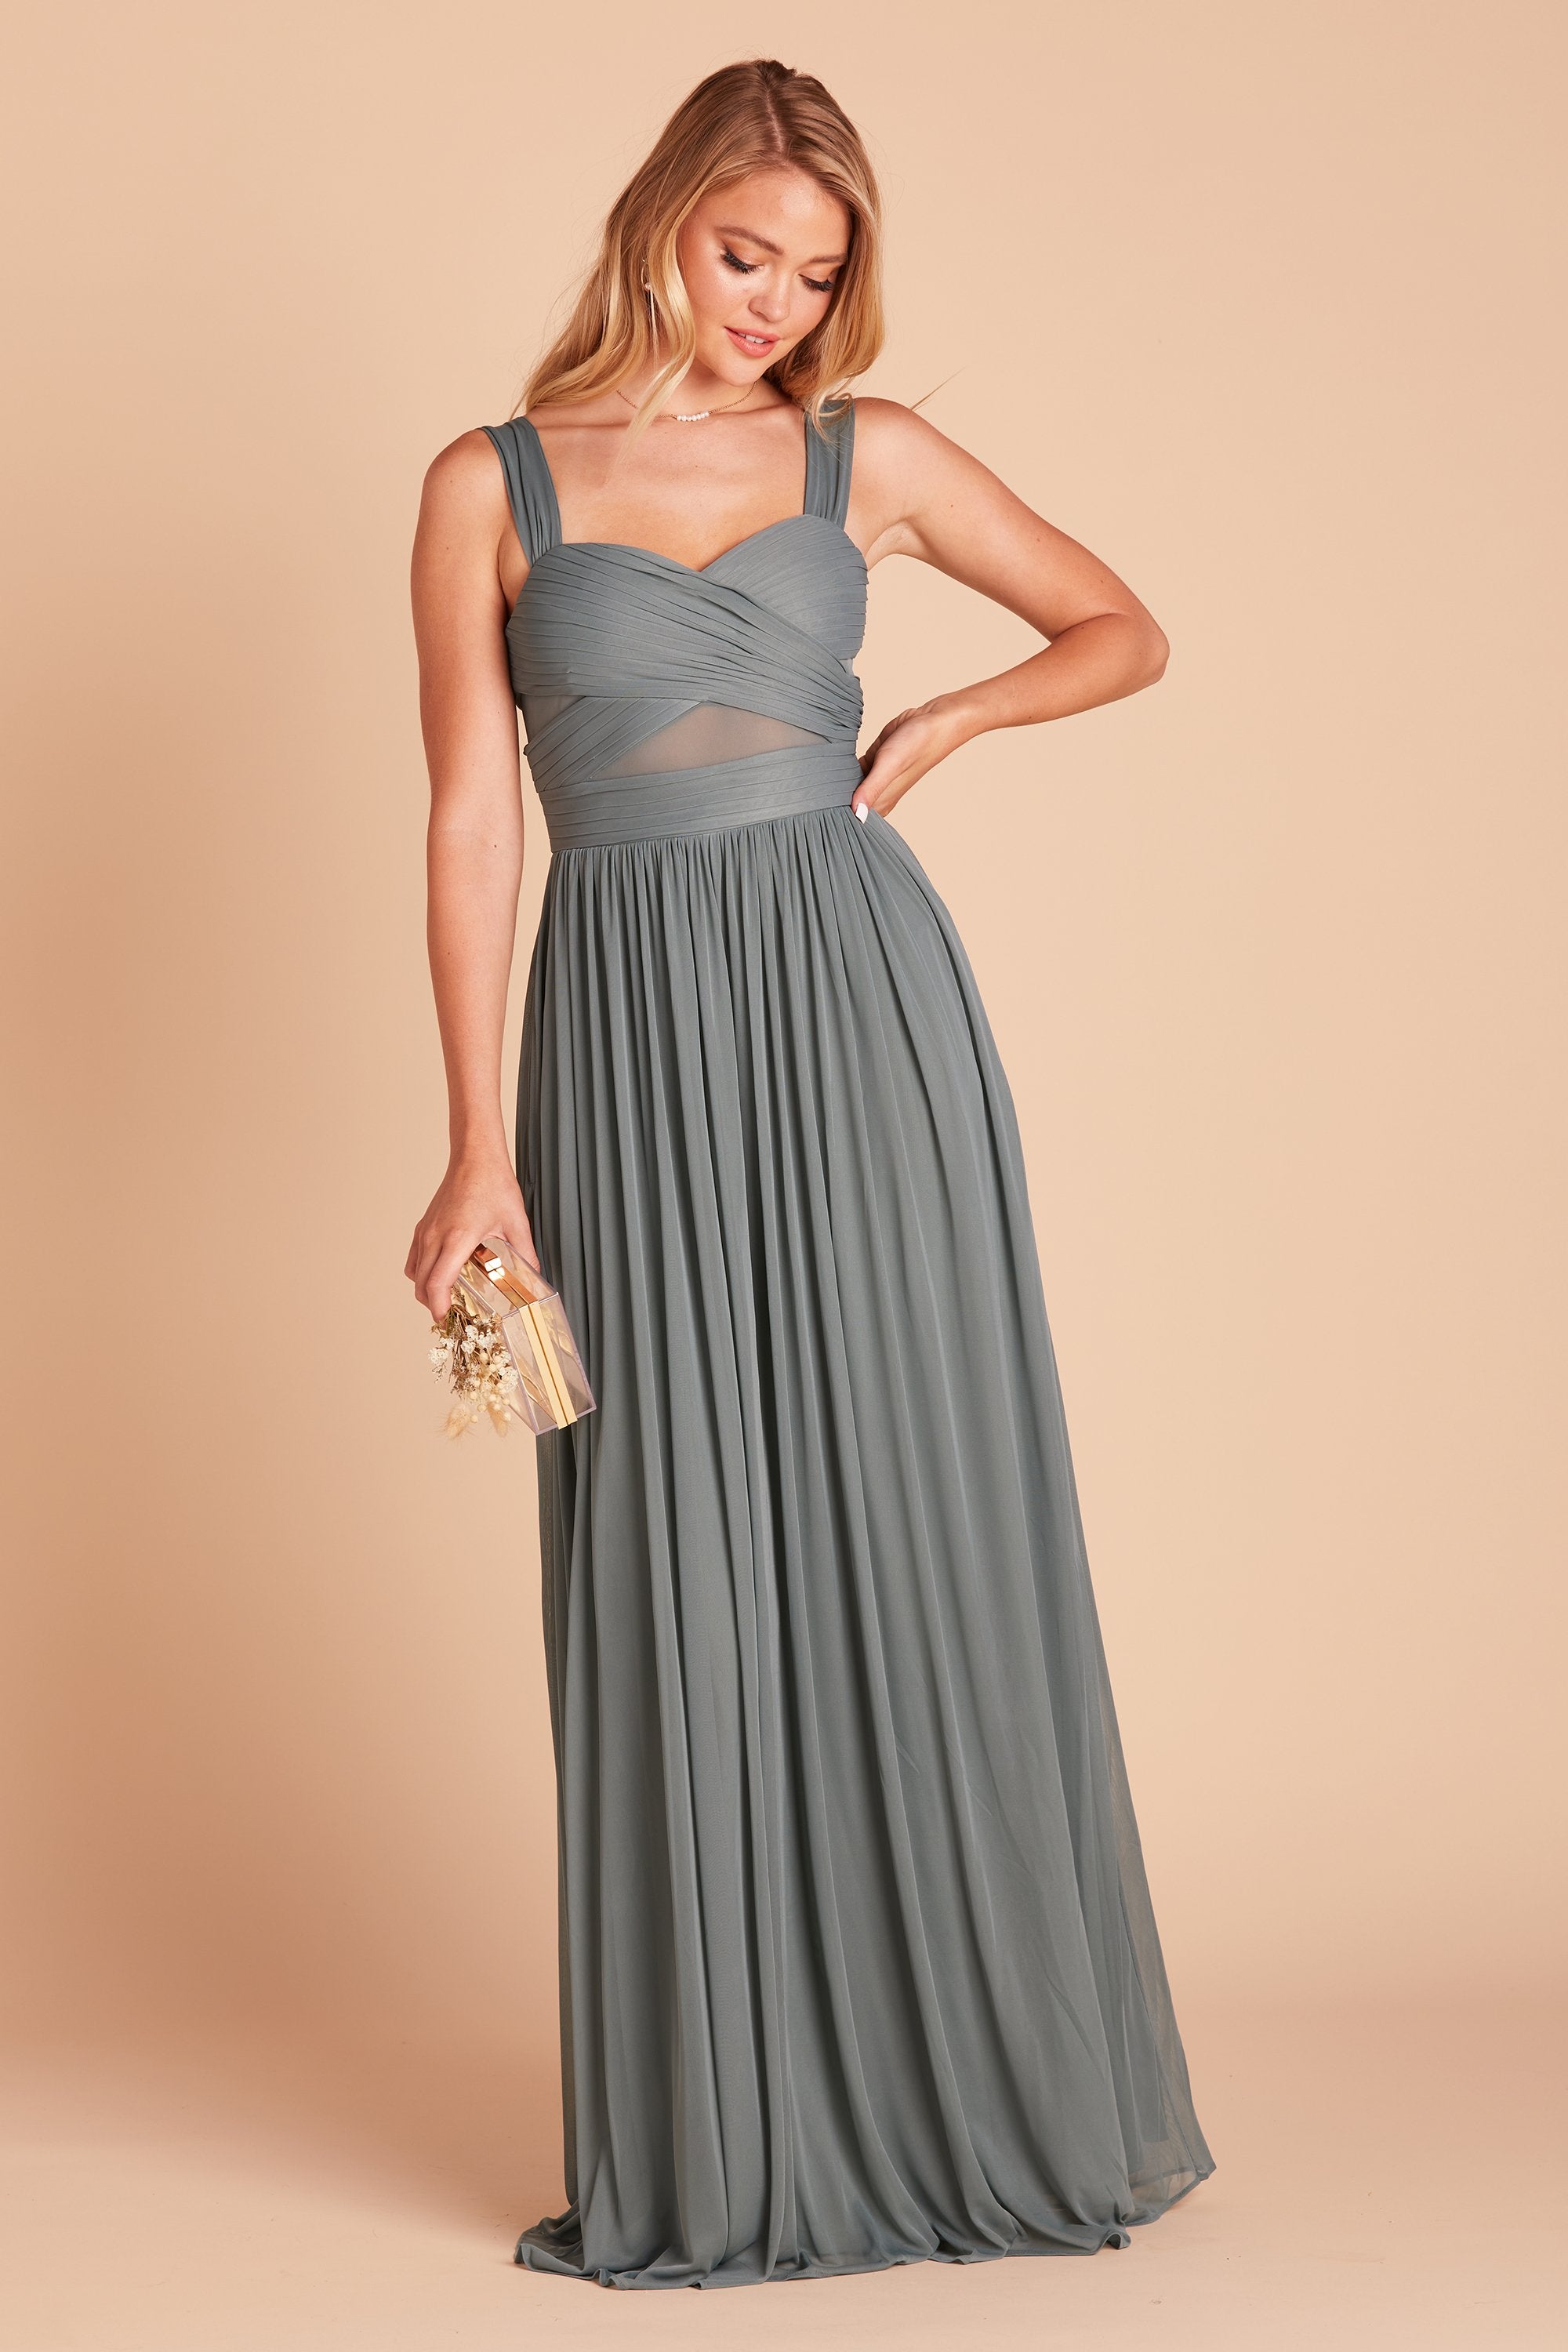 Elsye bridesmaid dress in sea glass green chiffon by Birdy Grey, front view